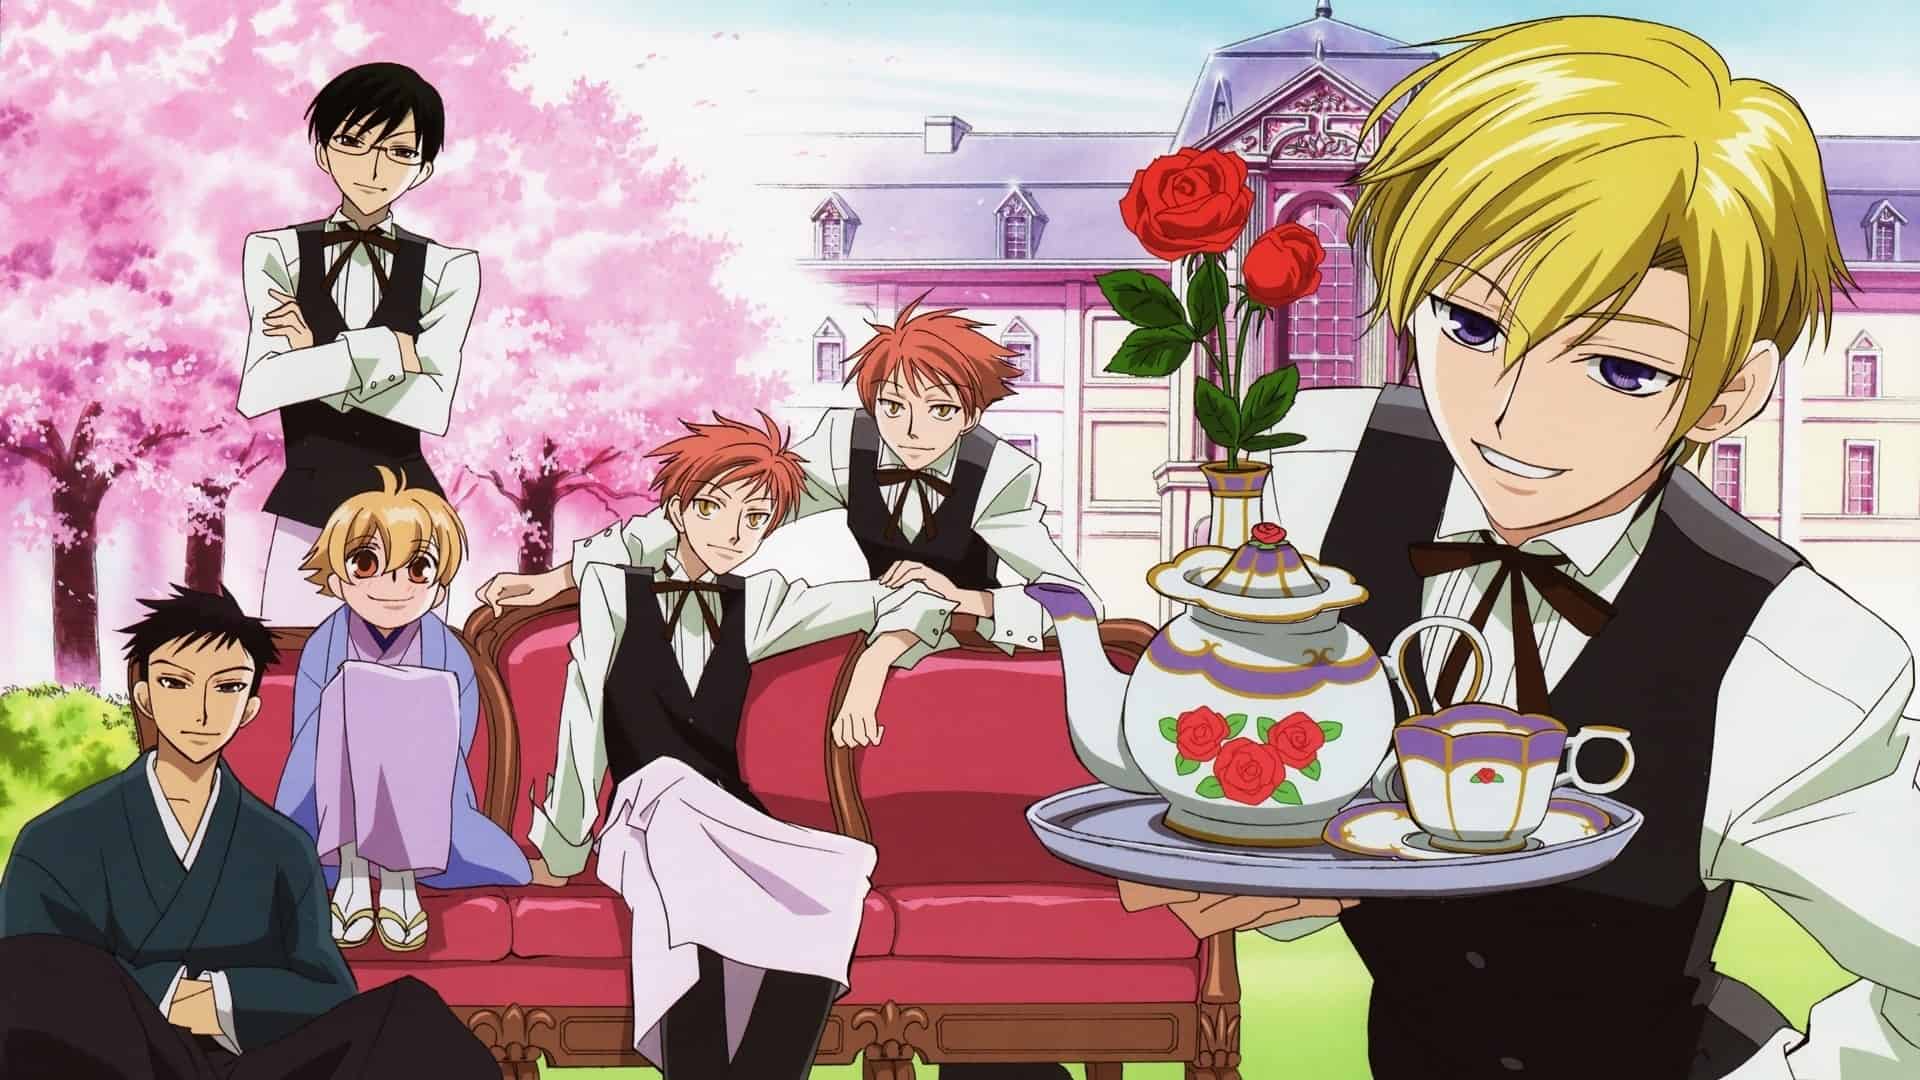 Ouran high school characters